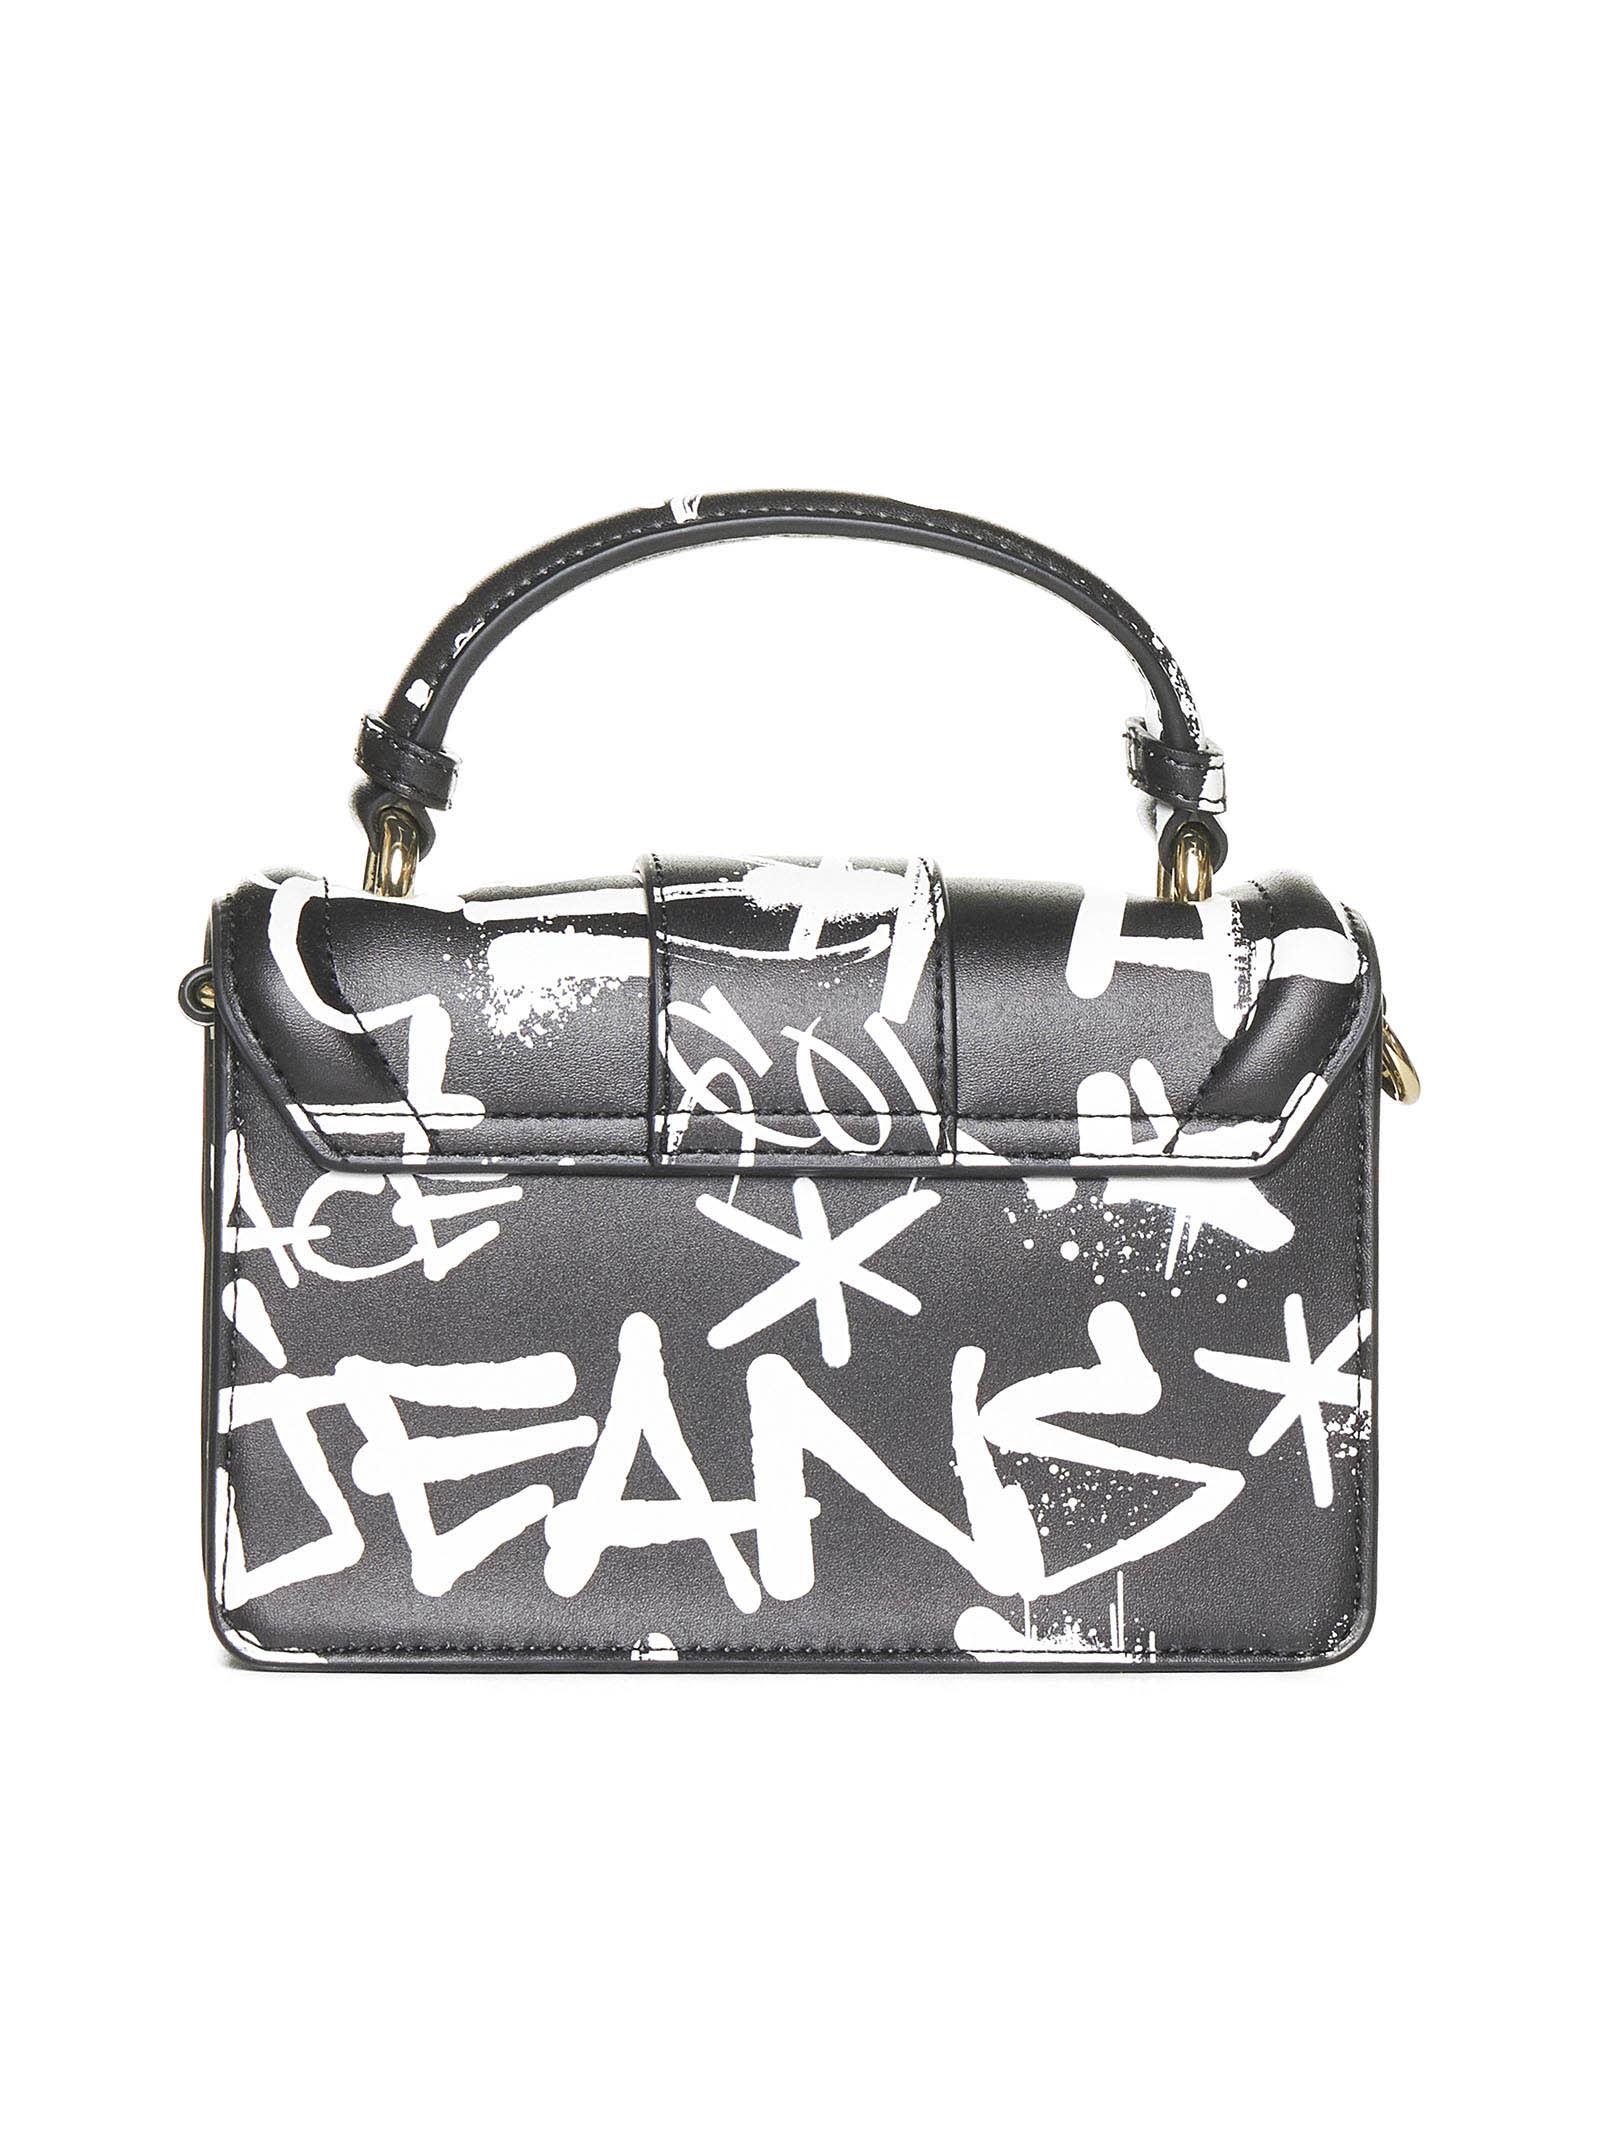 Versace Jeans Couture Couture Bags in White